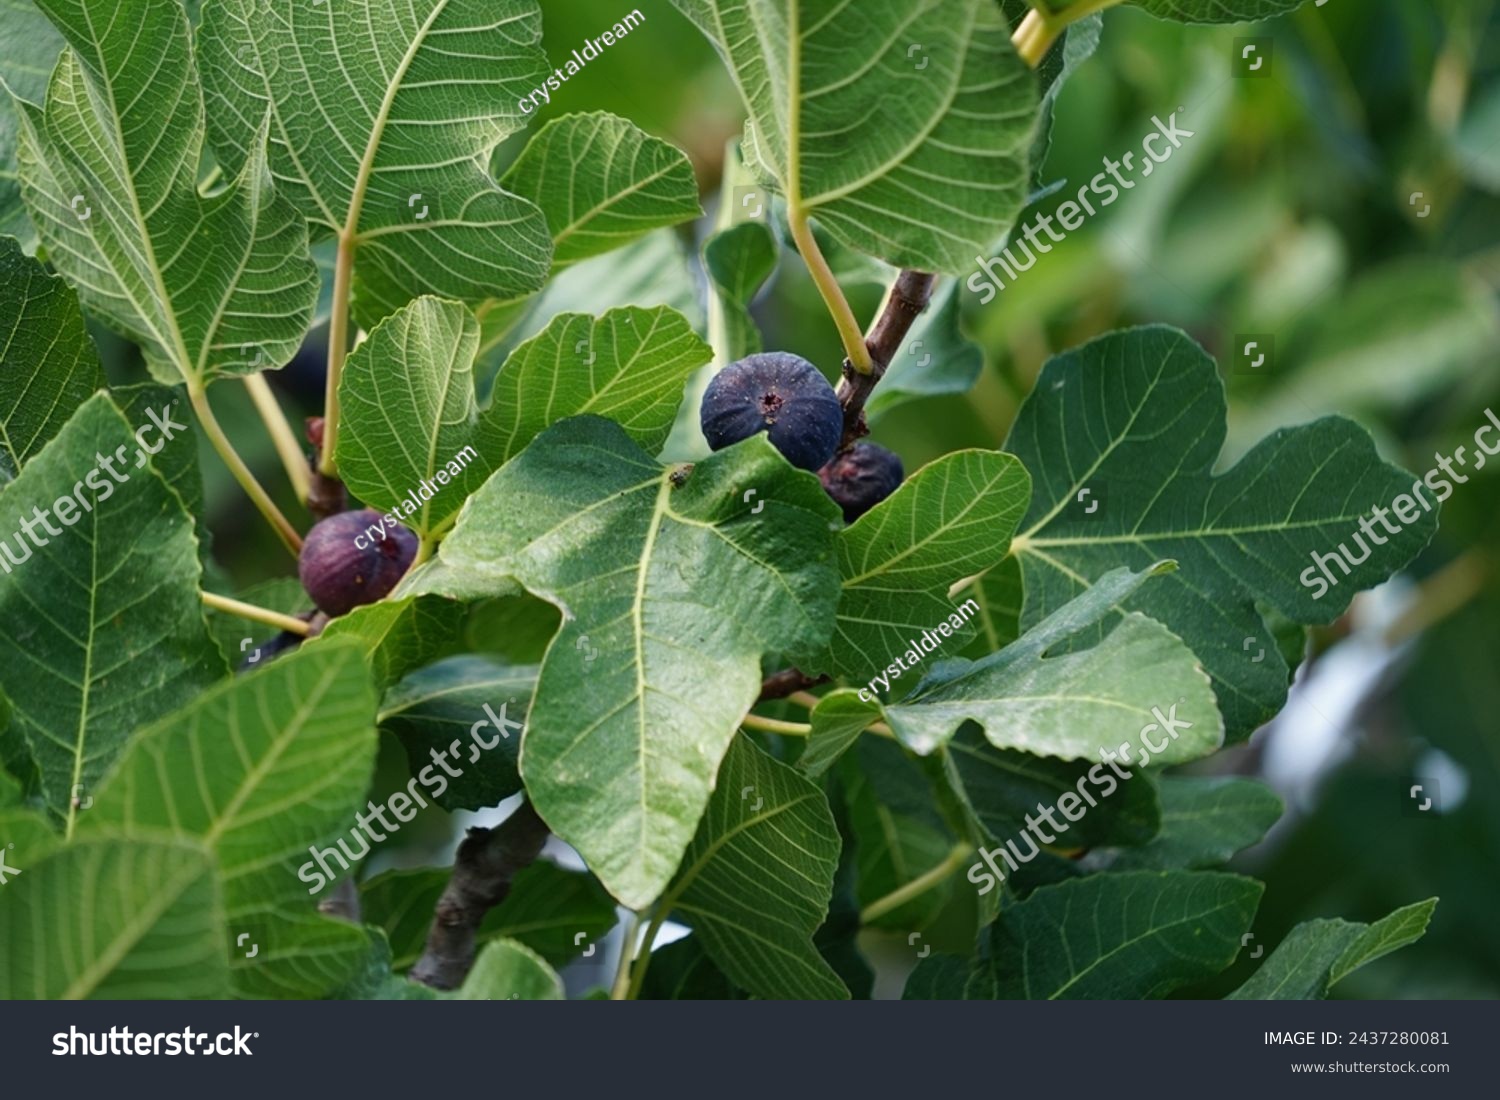 Ficus carica with fruits grows in August. The fig is the edible fruit of Ficus carica, a species of small tree in the flowering plant family Moraceae. Rhodes Island, Greece #2437280081